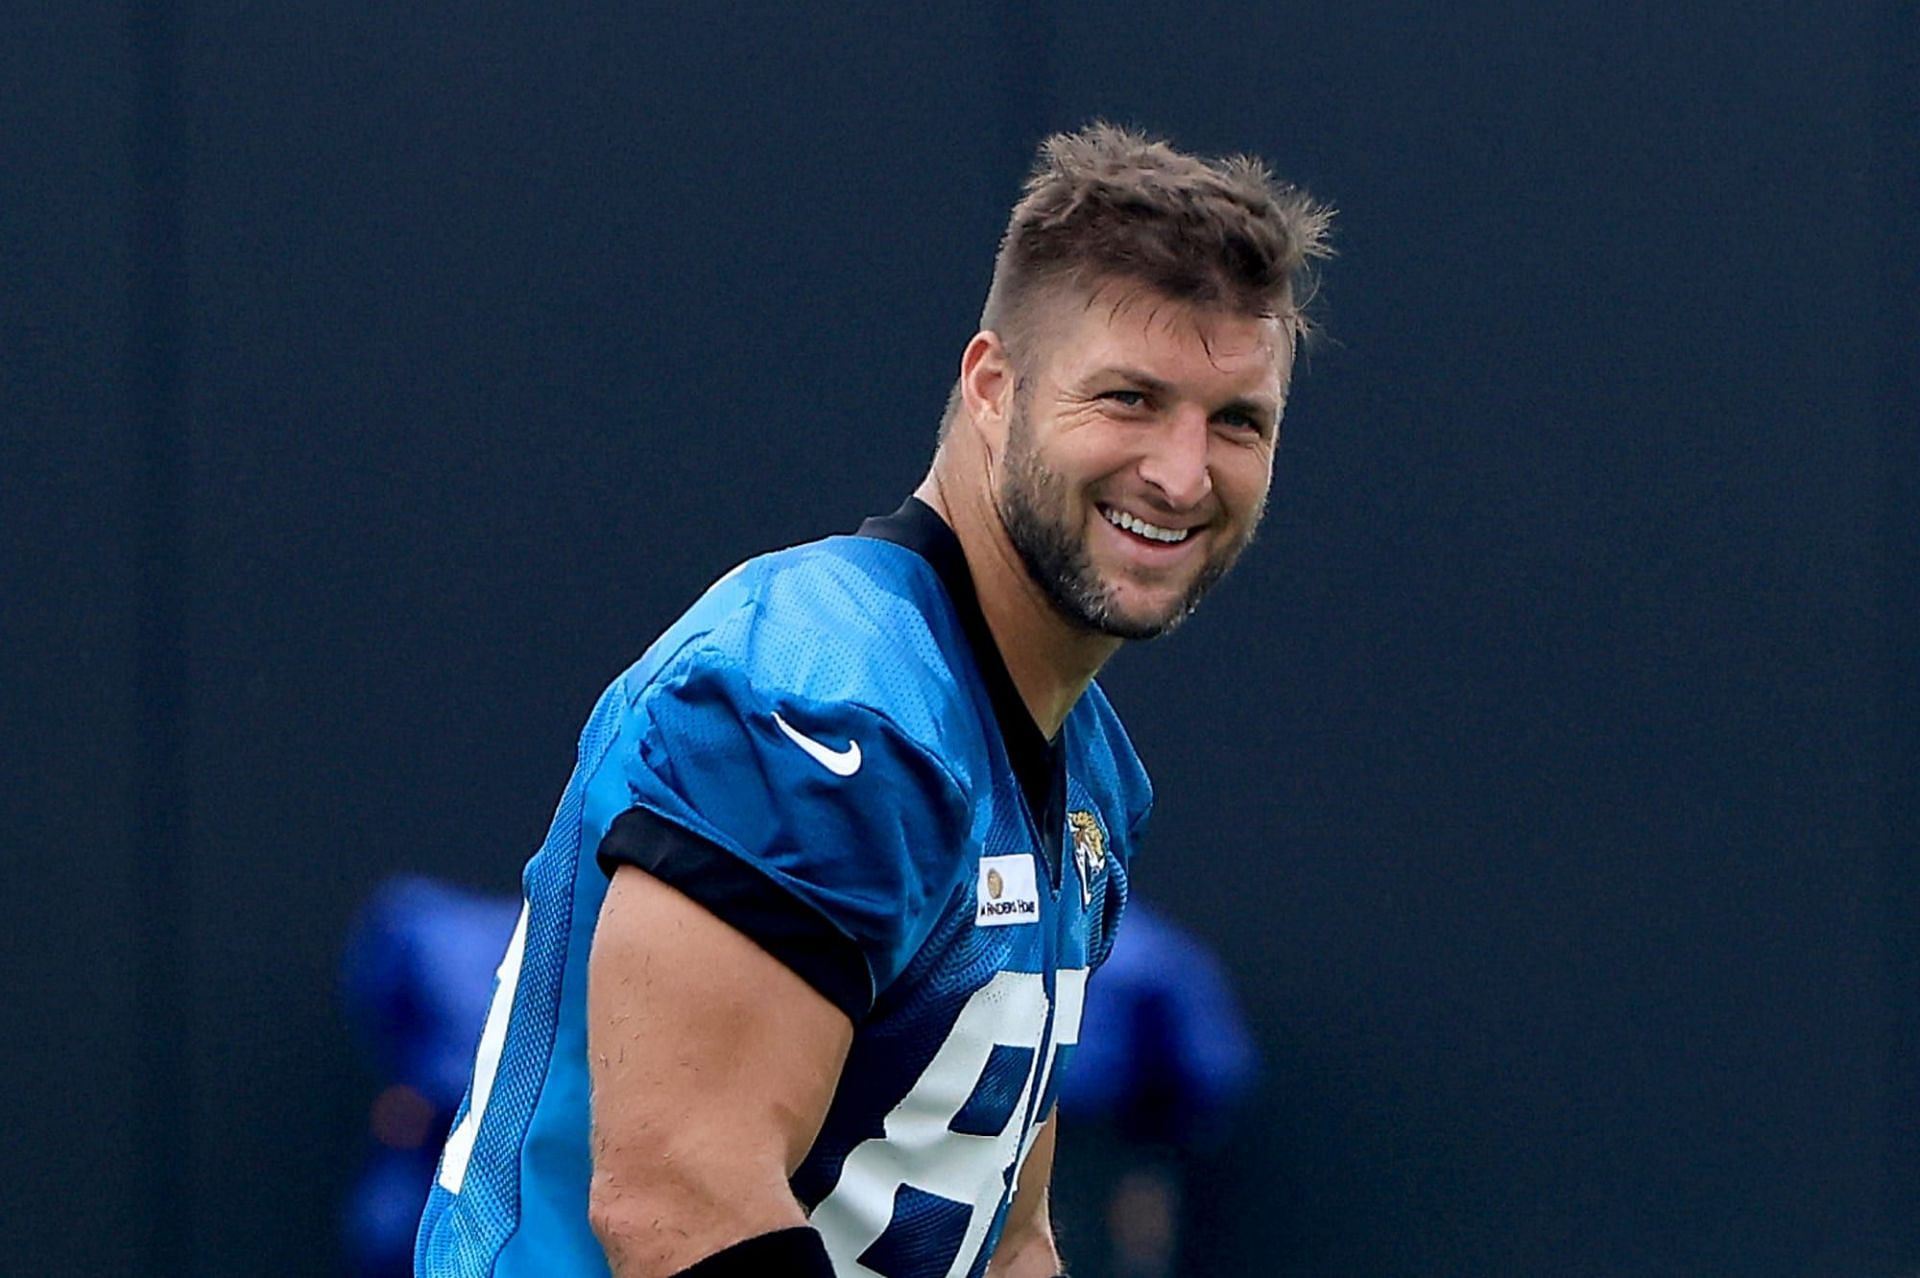 Is Tim Tebow still playing football?